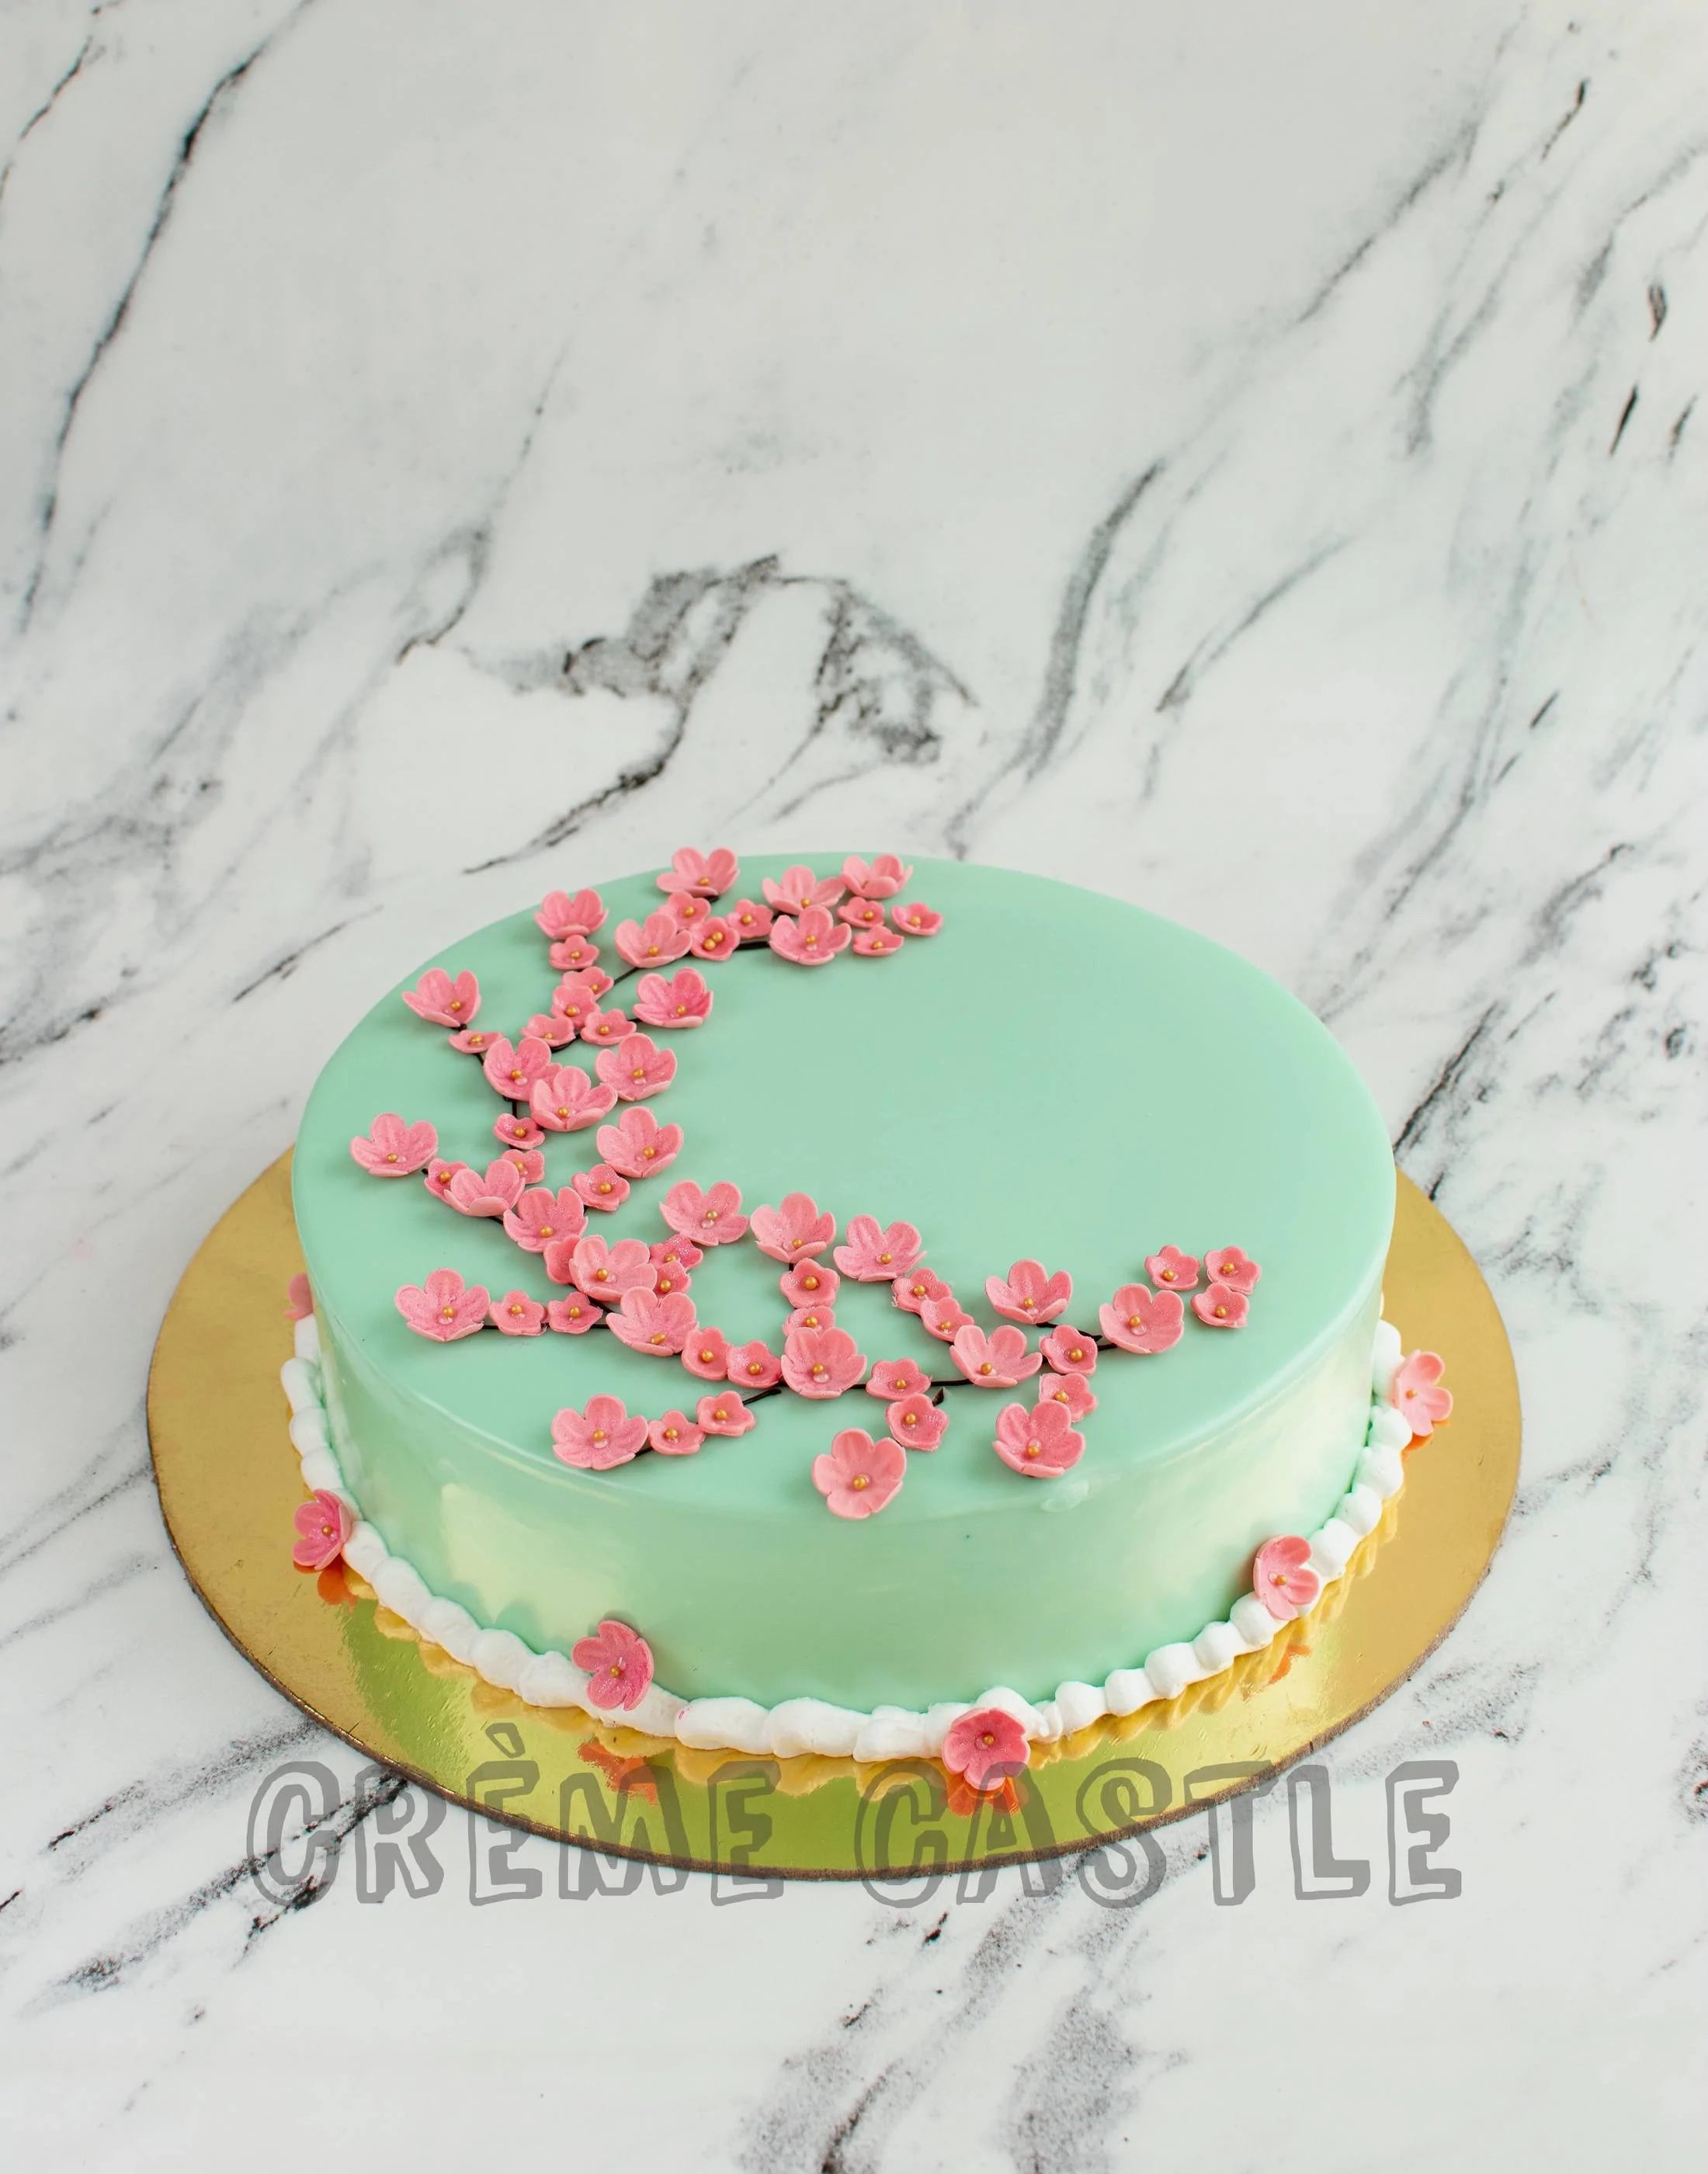 Dual Forest Cake Designs & Images